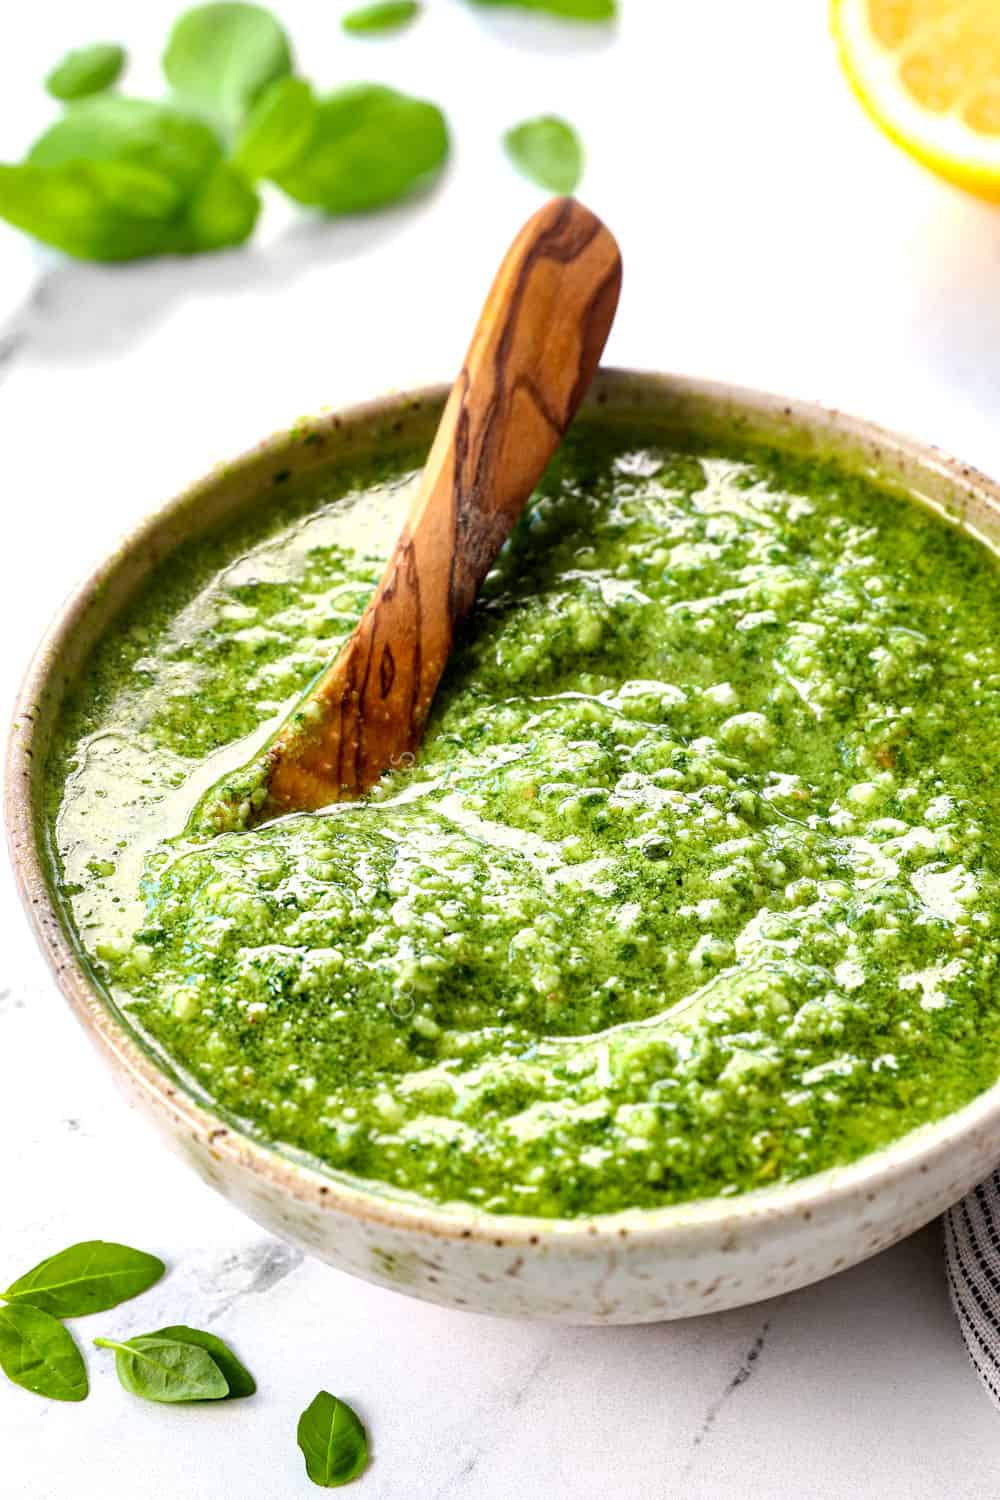 pesto recipe in a bowl for using as a dip, spread, appetizer or enhancer